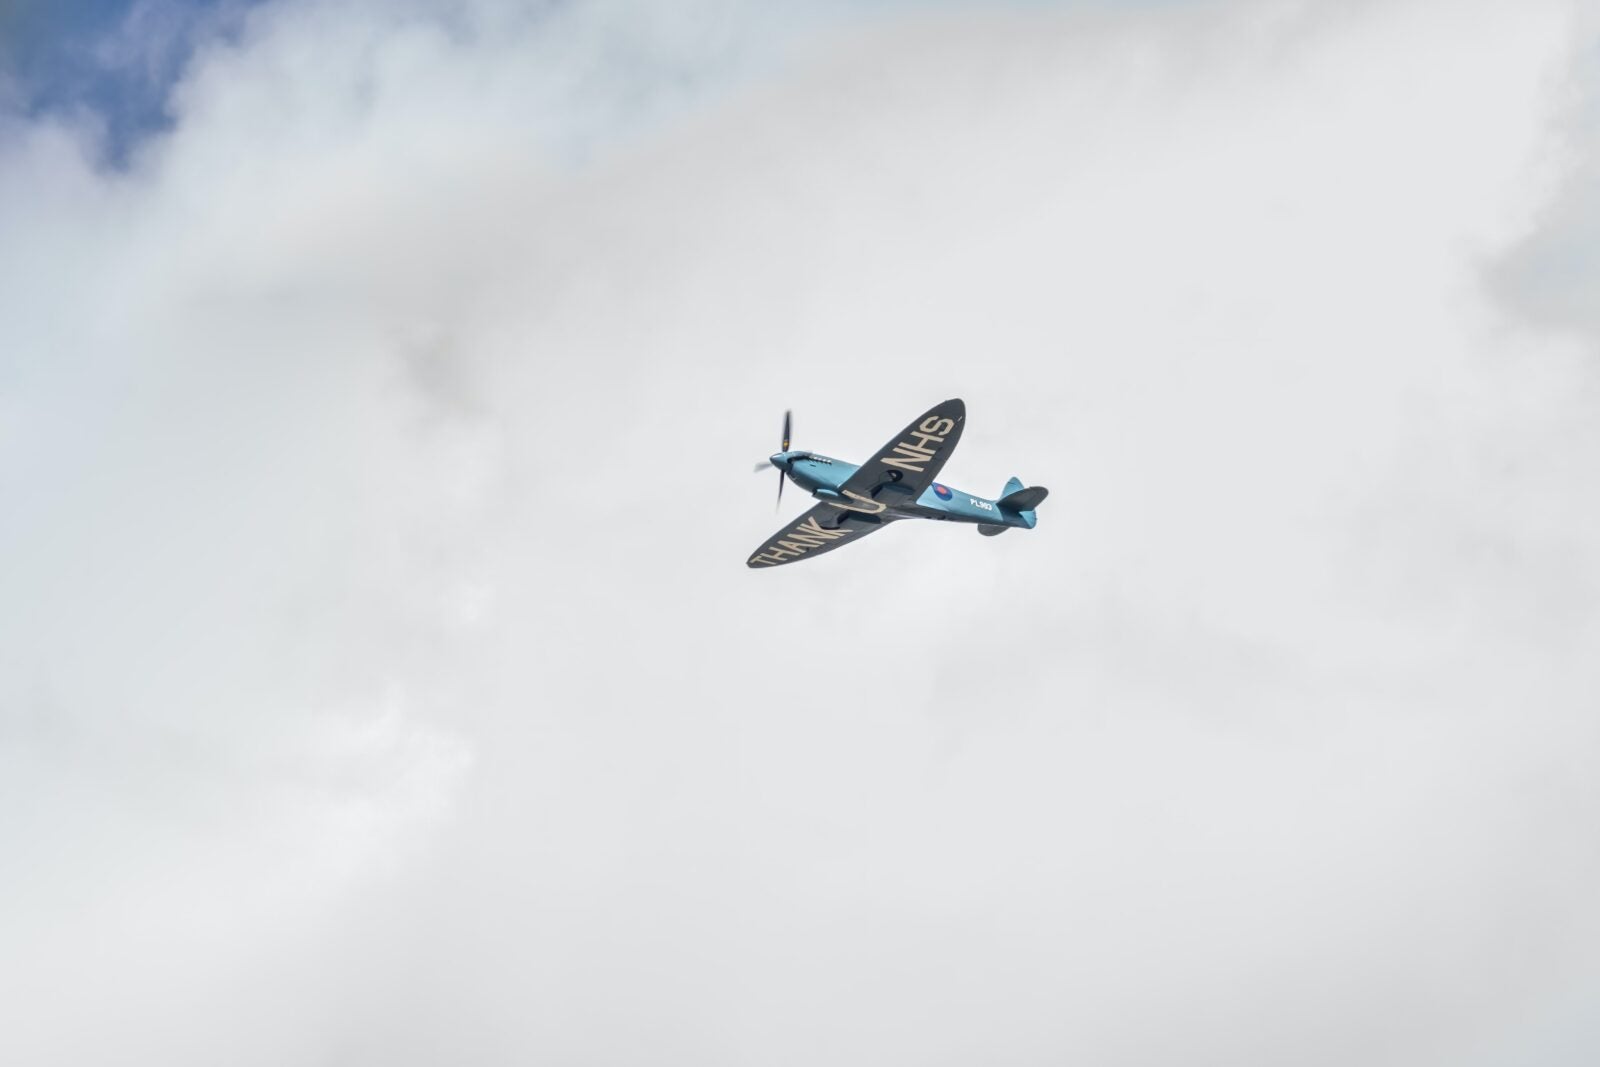 On August 1St, A Spitfire With &Quot;Thank You Nhs&Quot; Flew Past A Series Of Hospitals Here In The South East Of England. I Only Found Out Minutes Before It Flew Over My Garden, And I Was Able To Get A Couple Of Shots Showing The Message.